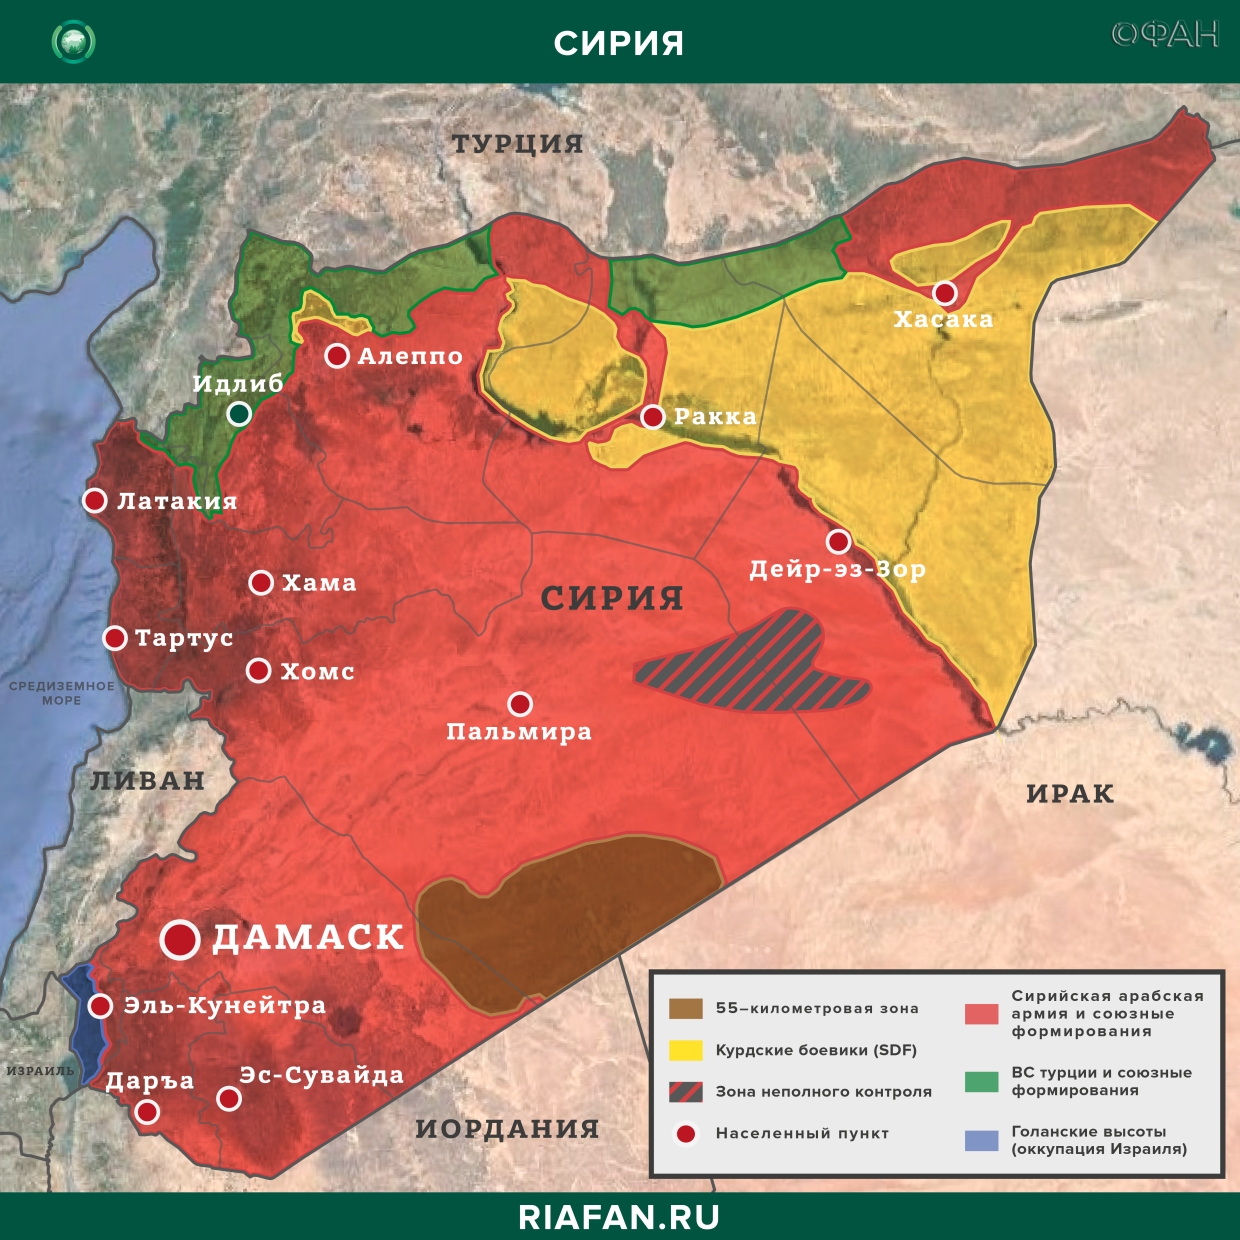 Syria news 18 February 07.00: CAA sent to the front line in Idlib military convoy, Departures US-led coalition in Deir ez-Zor